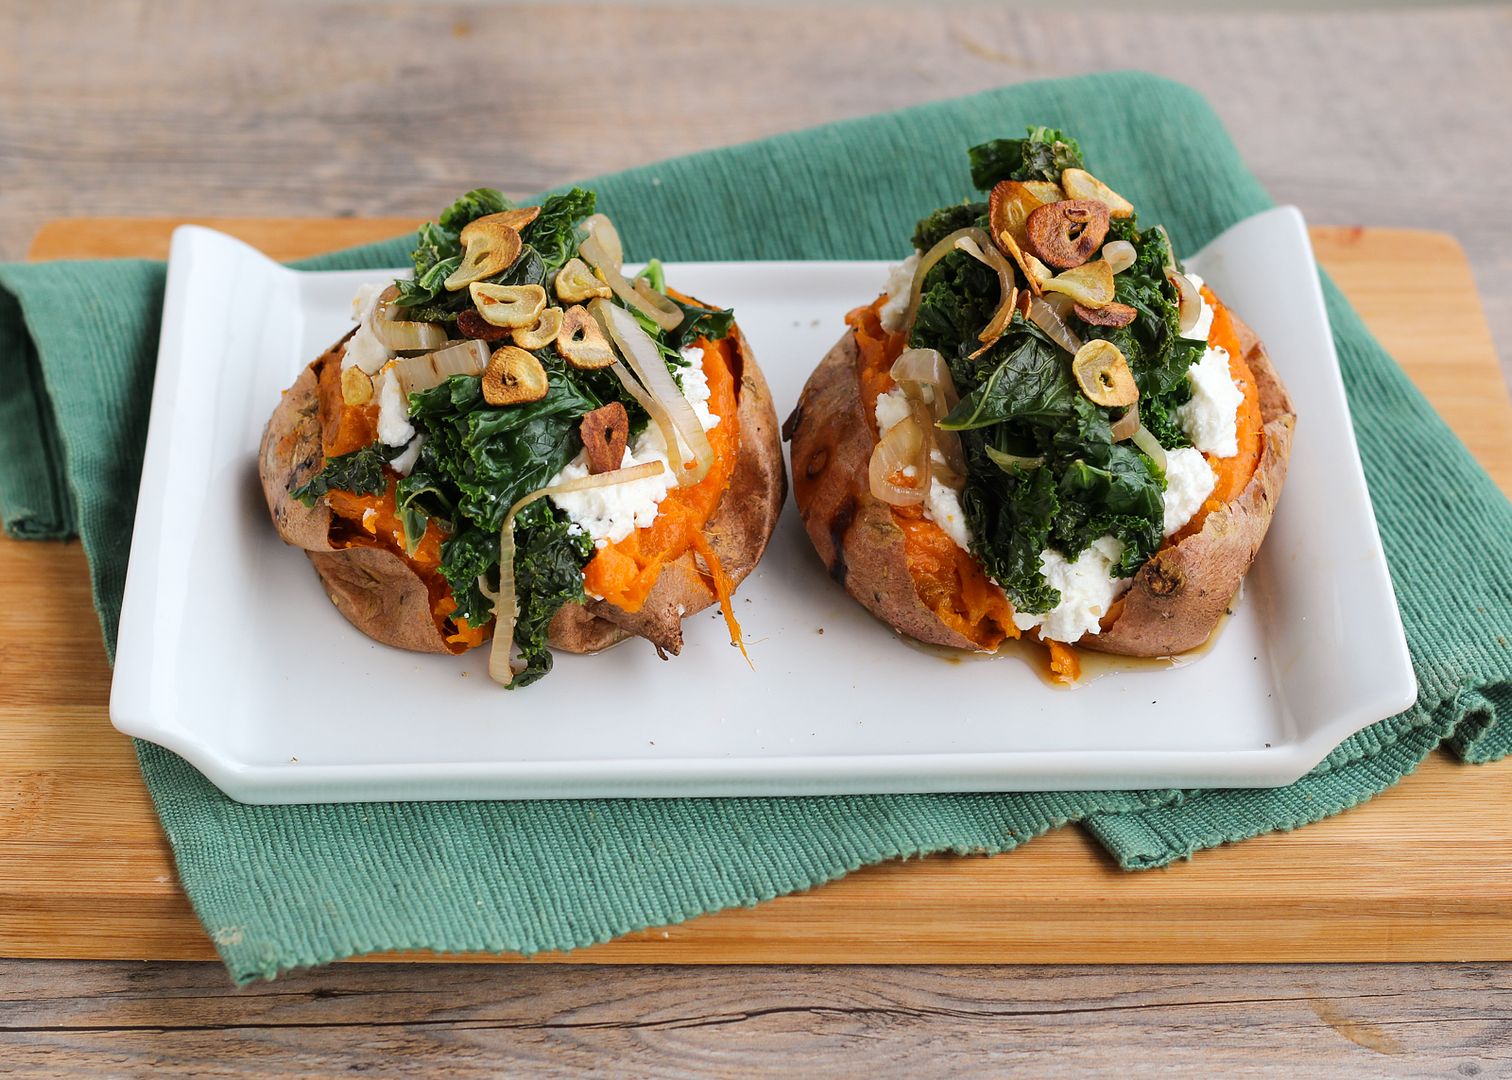 Baked Sweet Potatoes Topped with Ricotta, Goat Cheese, Kale, and Garlic Chips